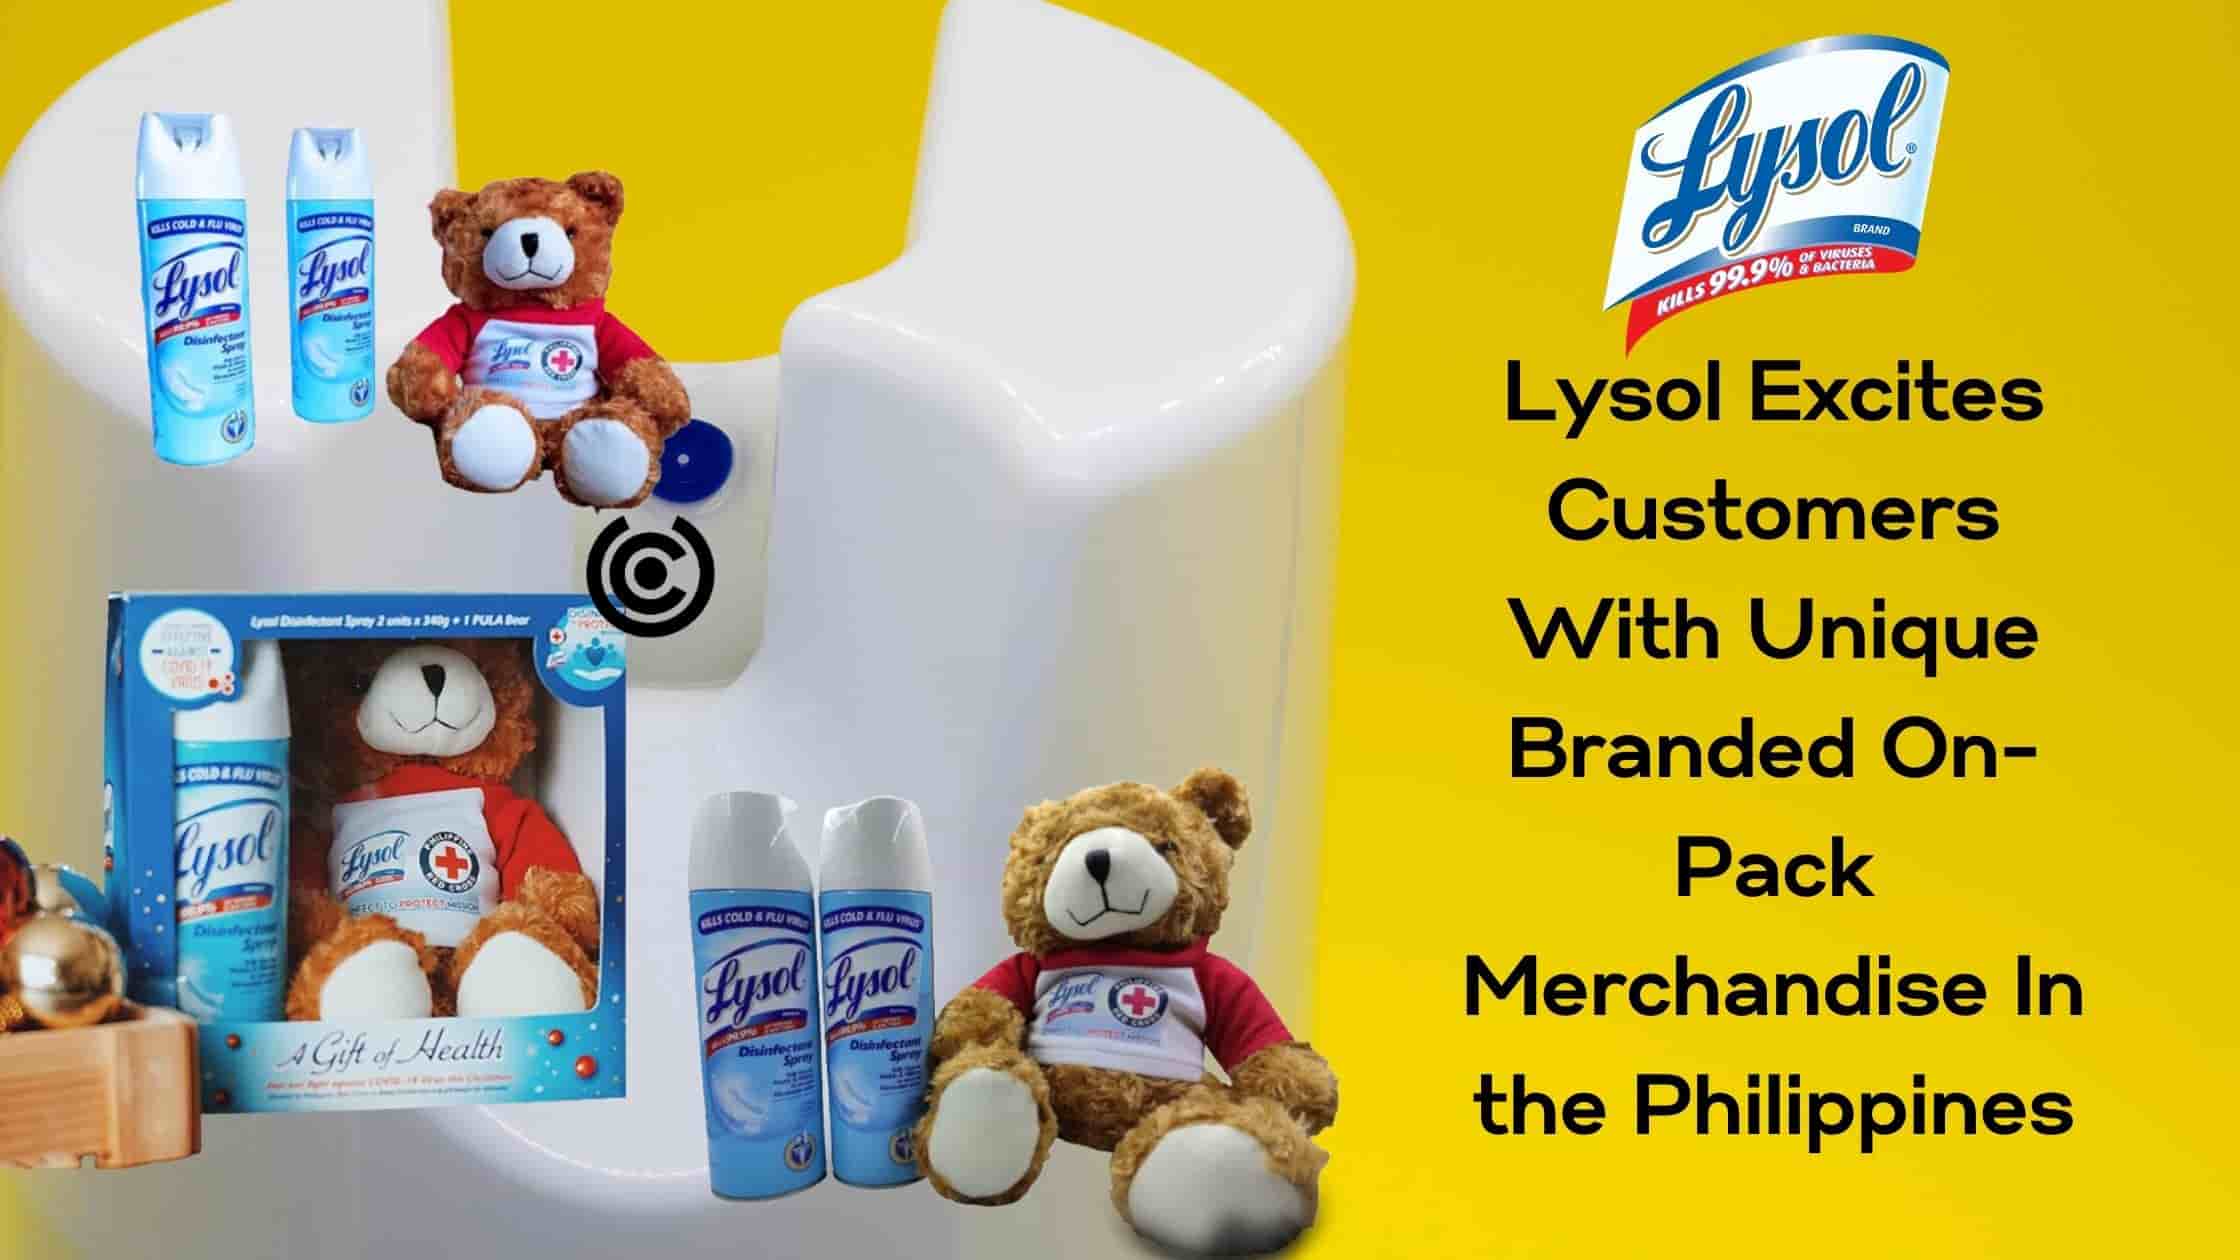 Lysol Excites Customers With Unique Branded On-Pack Merchandise In the Philippines